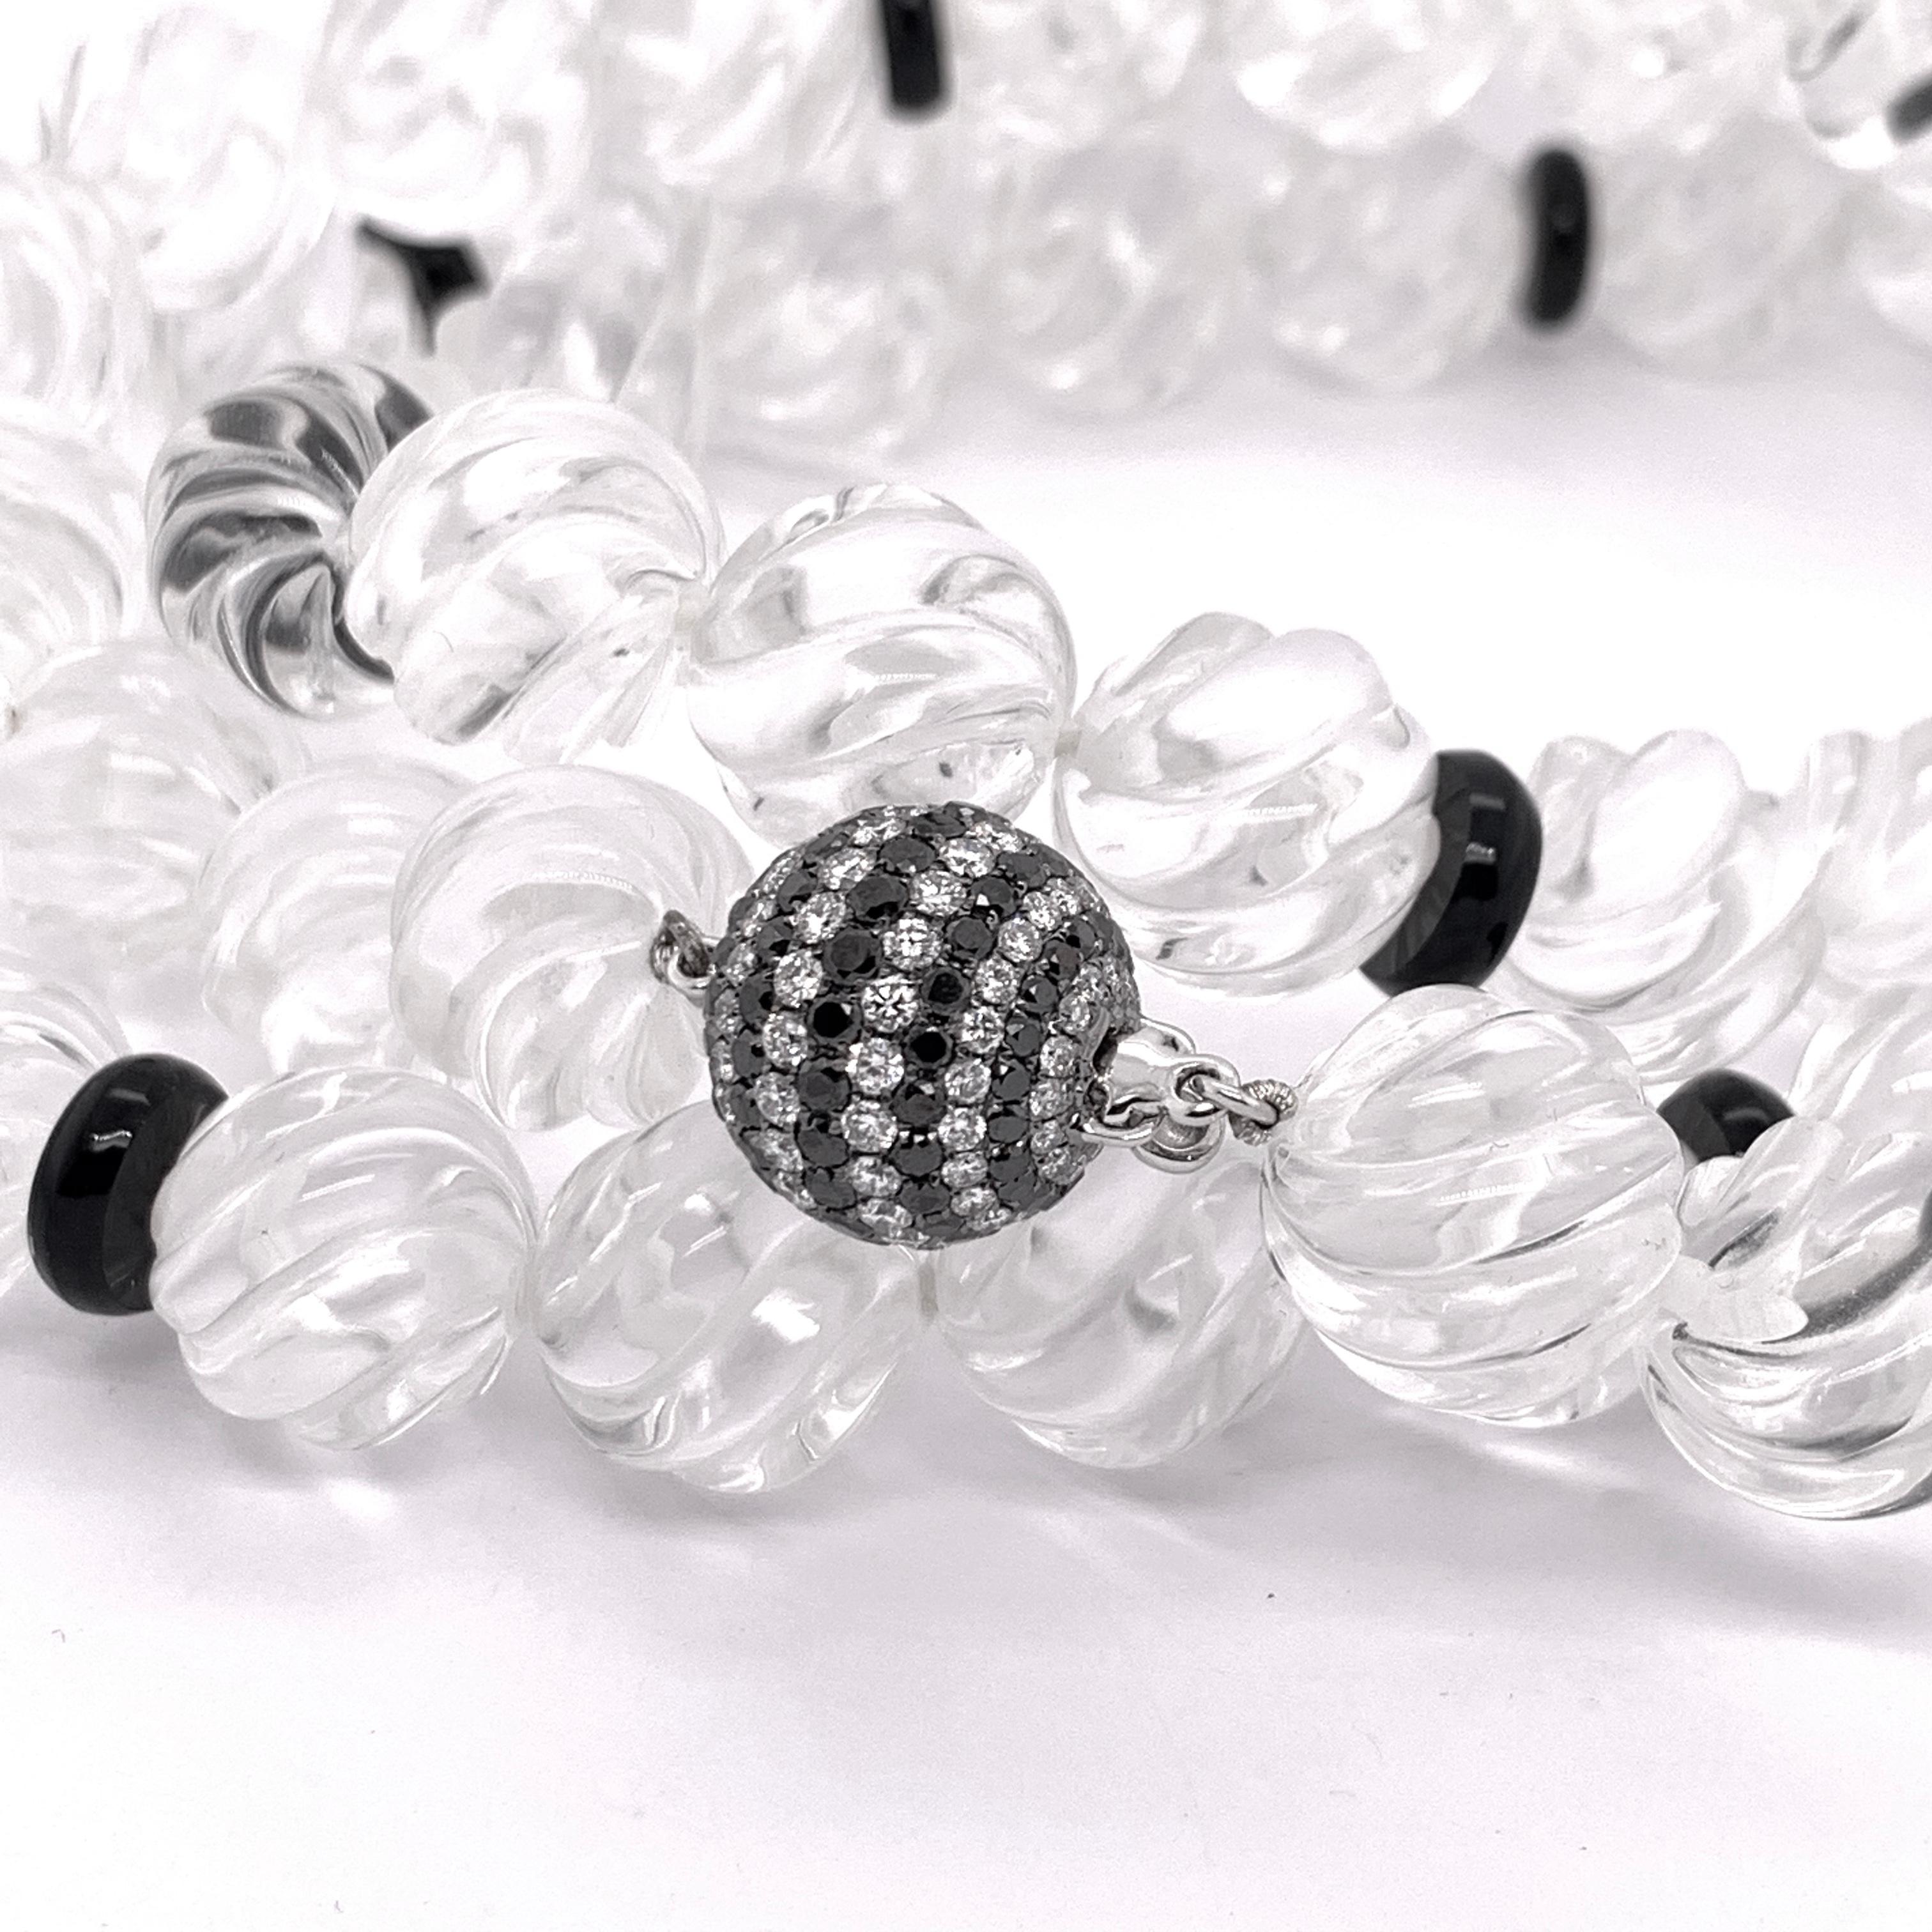 A carved rock crystal bead necklace, with black onyx rondelles, with an 18ct white gold pavé set black and white diamond ball clasp. Length approximately 33 inches.